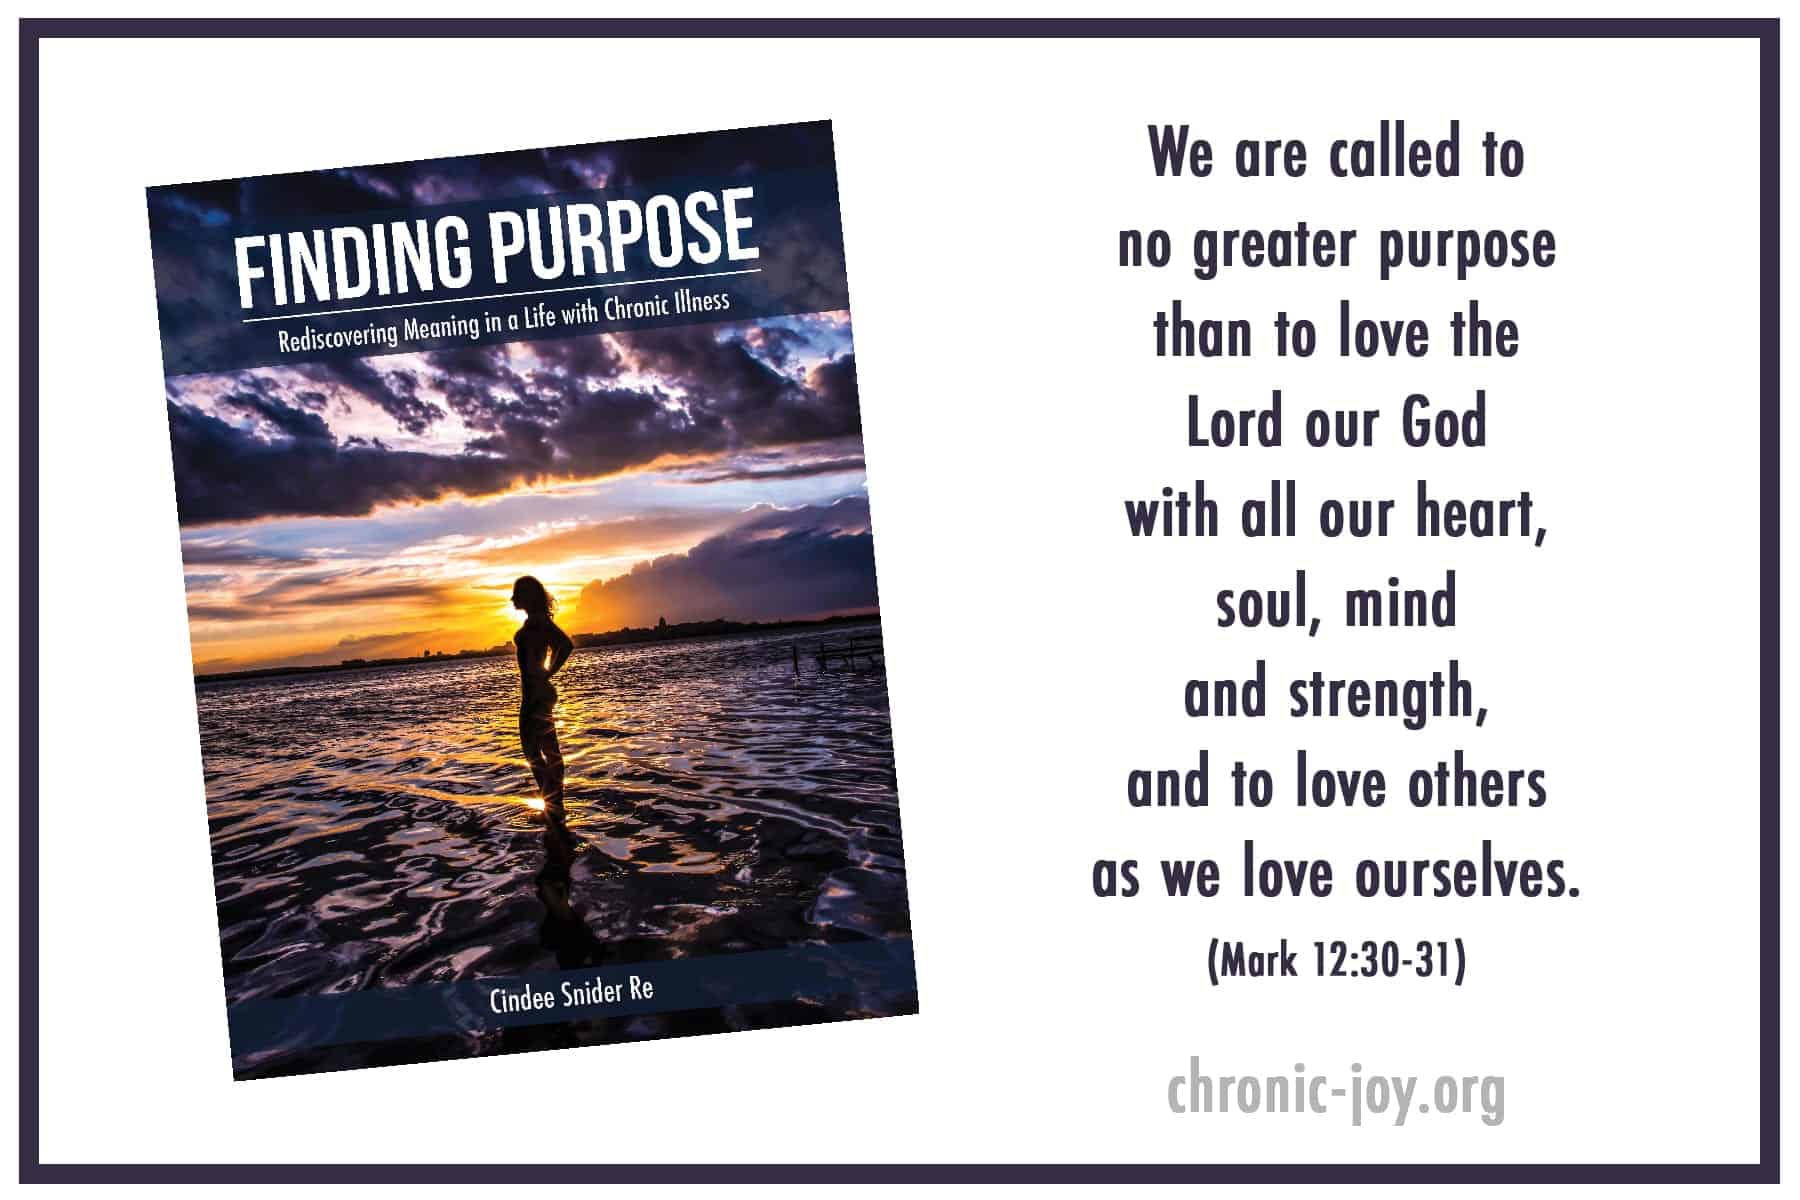 We are called to no greater purpose than to love our God...